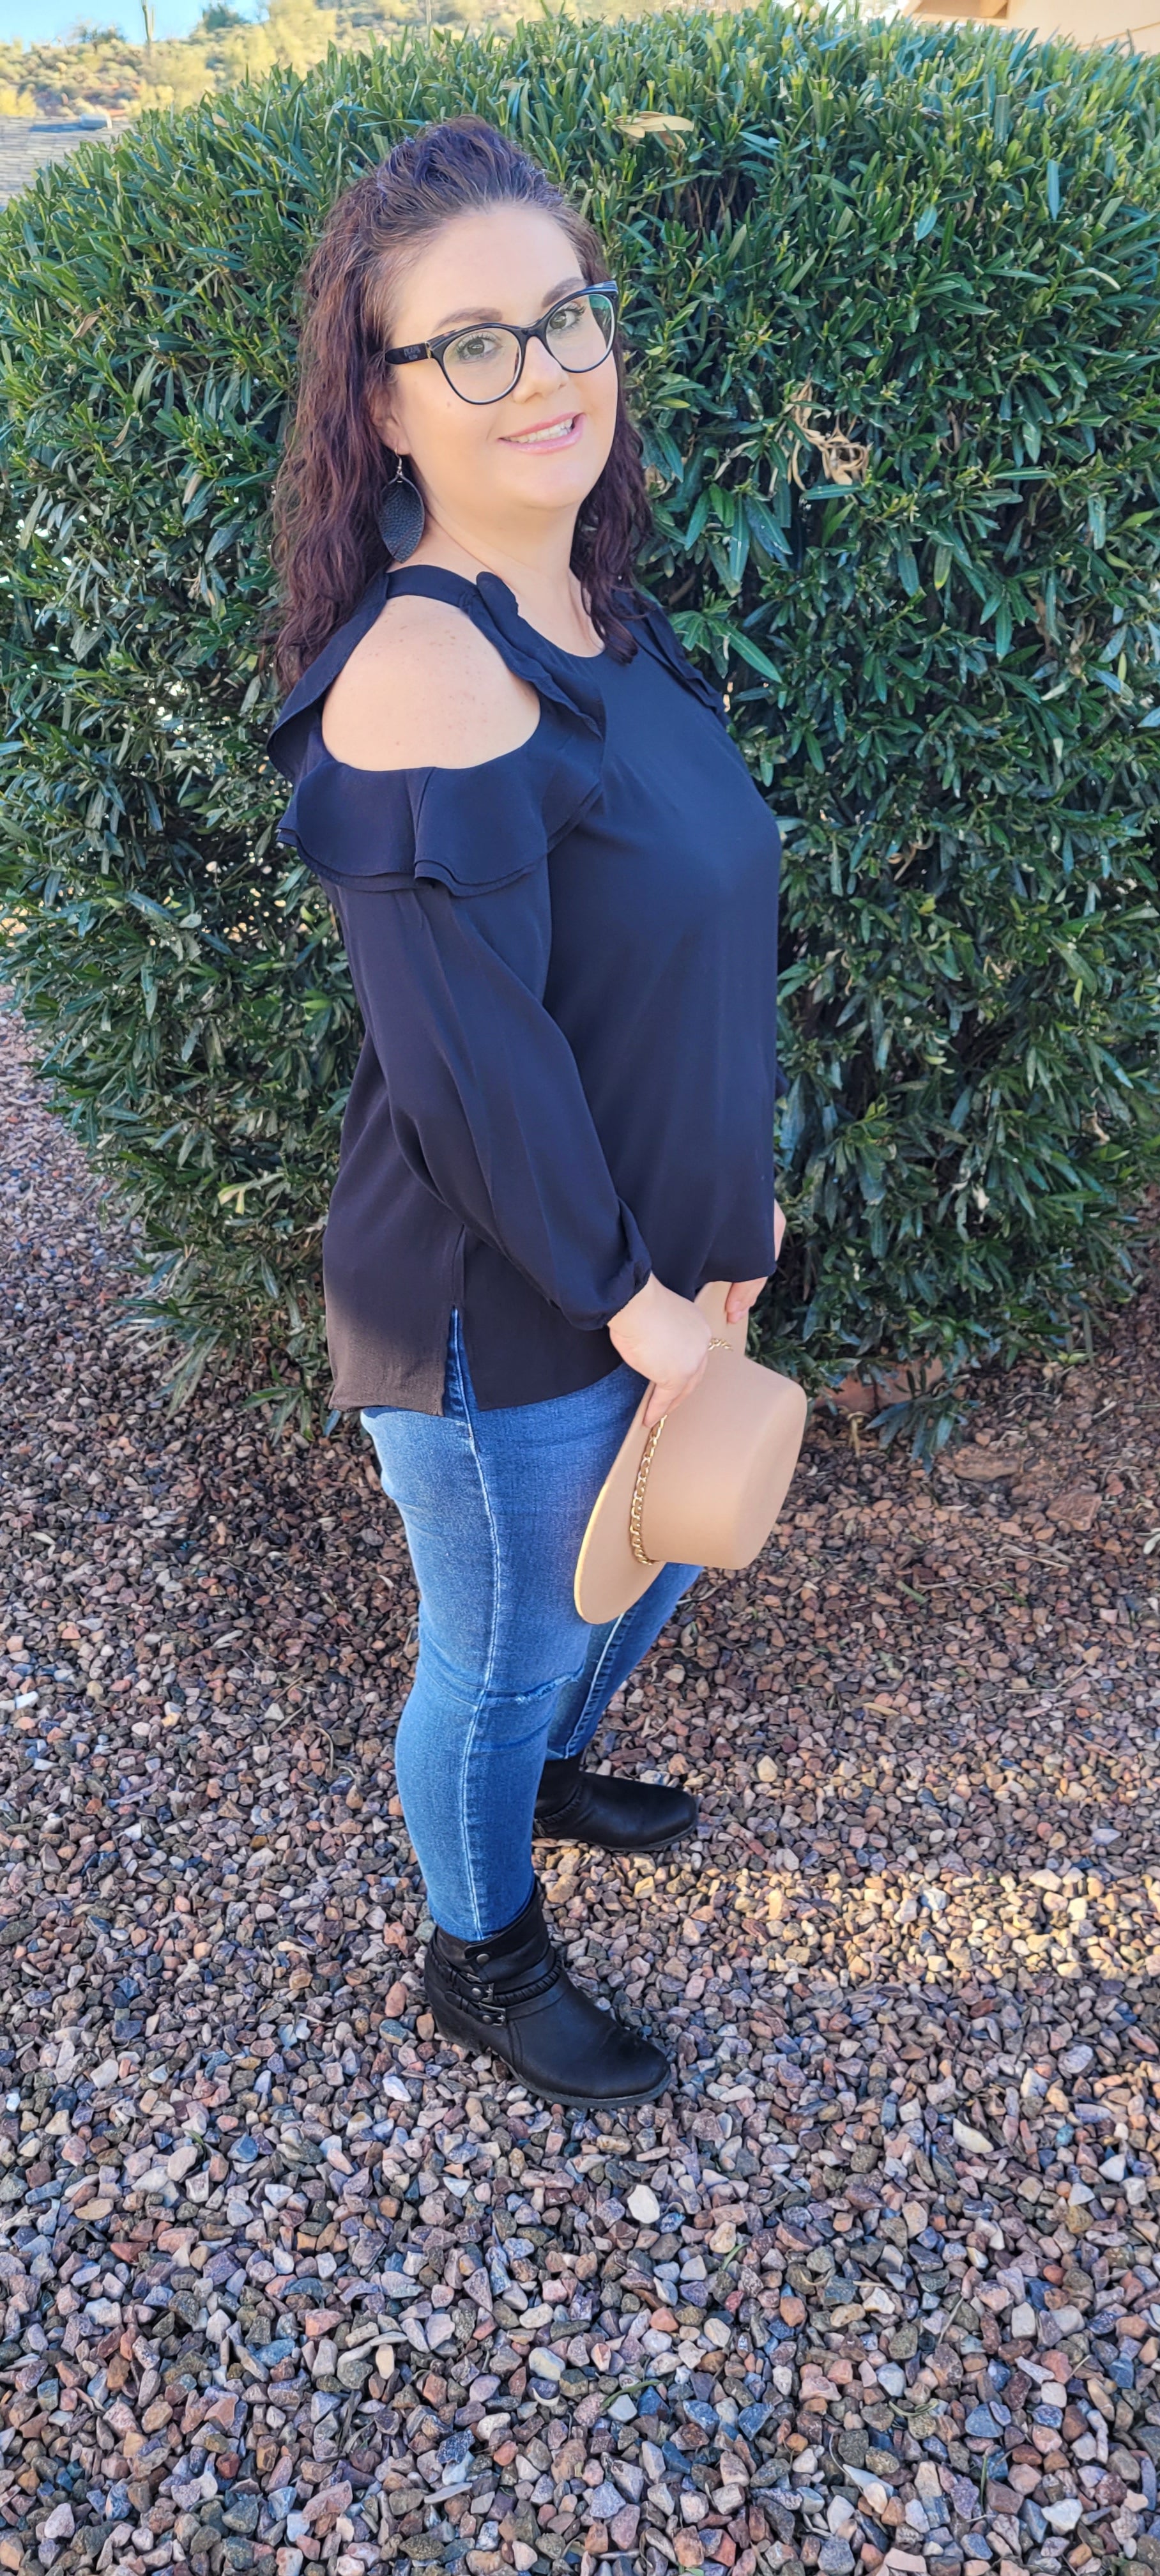 The Twilight top is a must have staple in your closet. This black top features puff sleeves, with an elastic cuff, open ruffled cold shoulder long sleeves, and rounded neckline. This top is light weight, so it can be worn in the summer, spring, fall or winter. You can dress this number up, or leave it the way it is, since it's just so darn cute.  Sizes small through large.